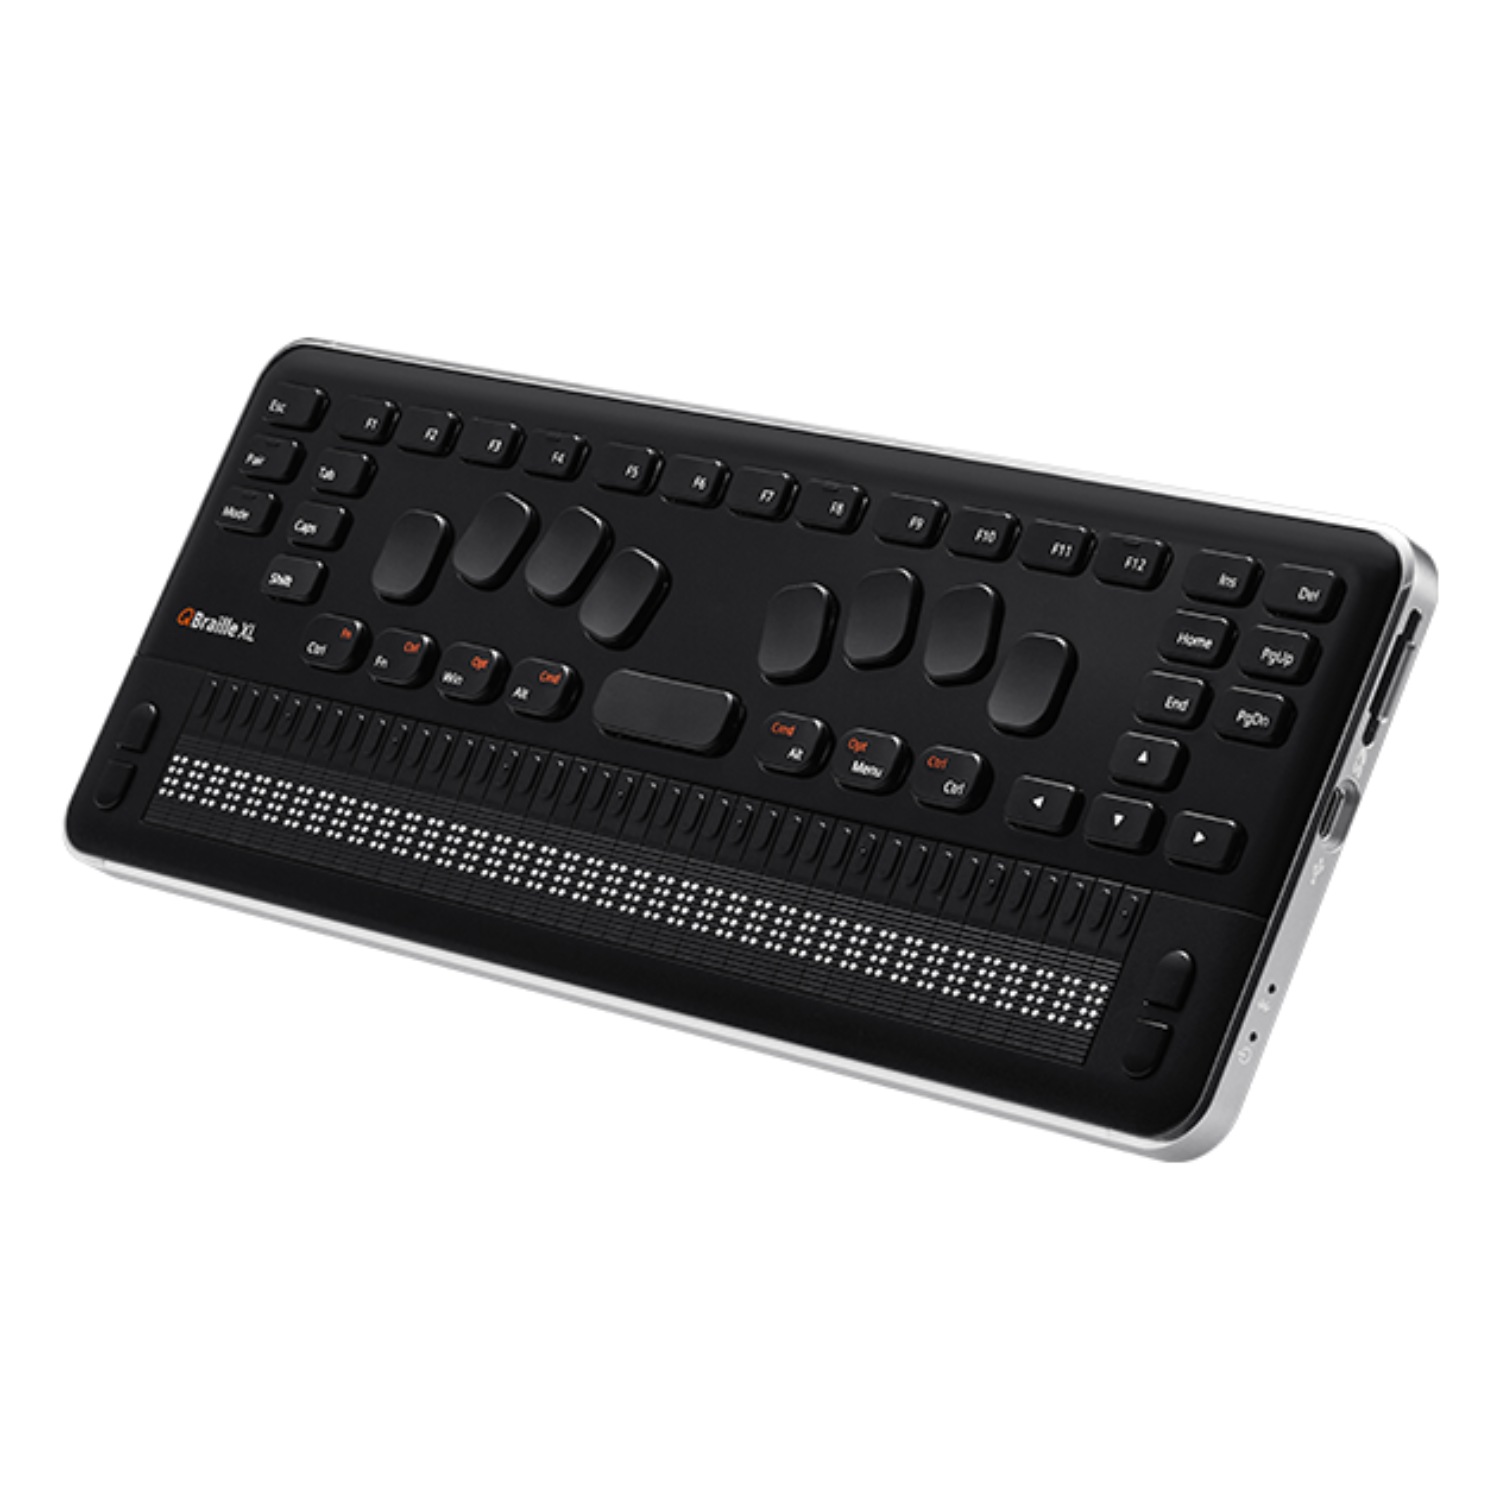 Image of the QBraille XL 40-cell braille display and keyboard from HIMS